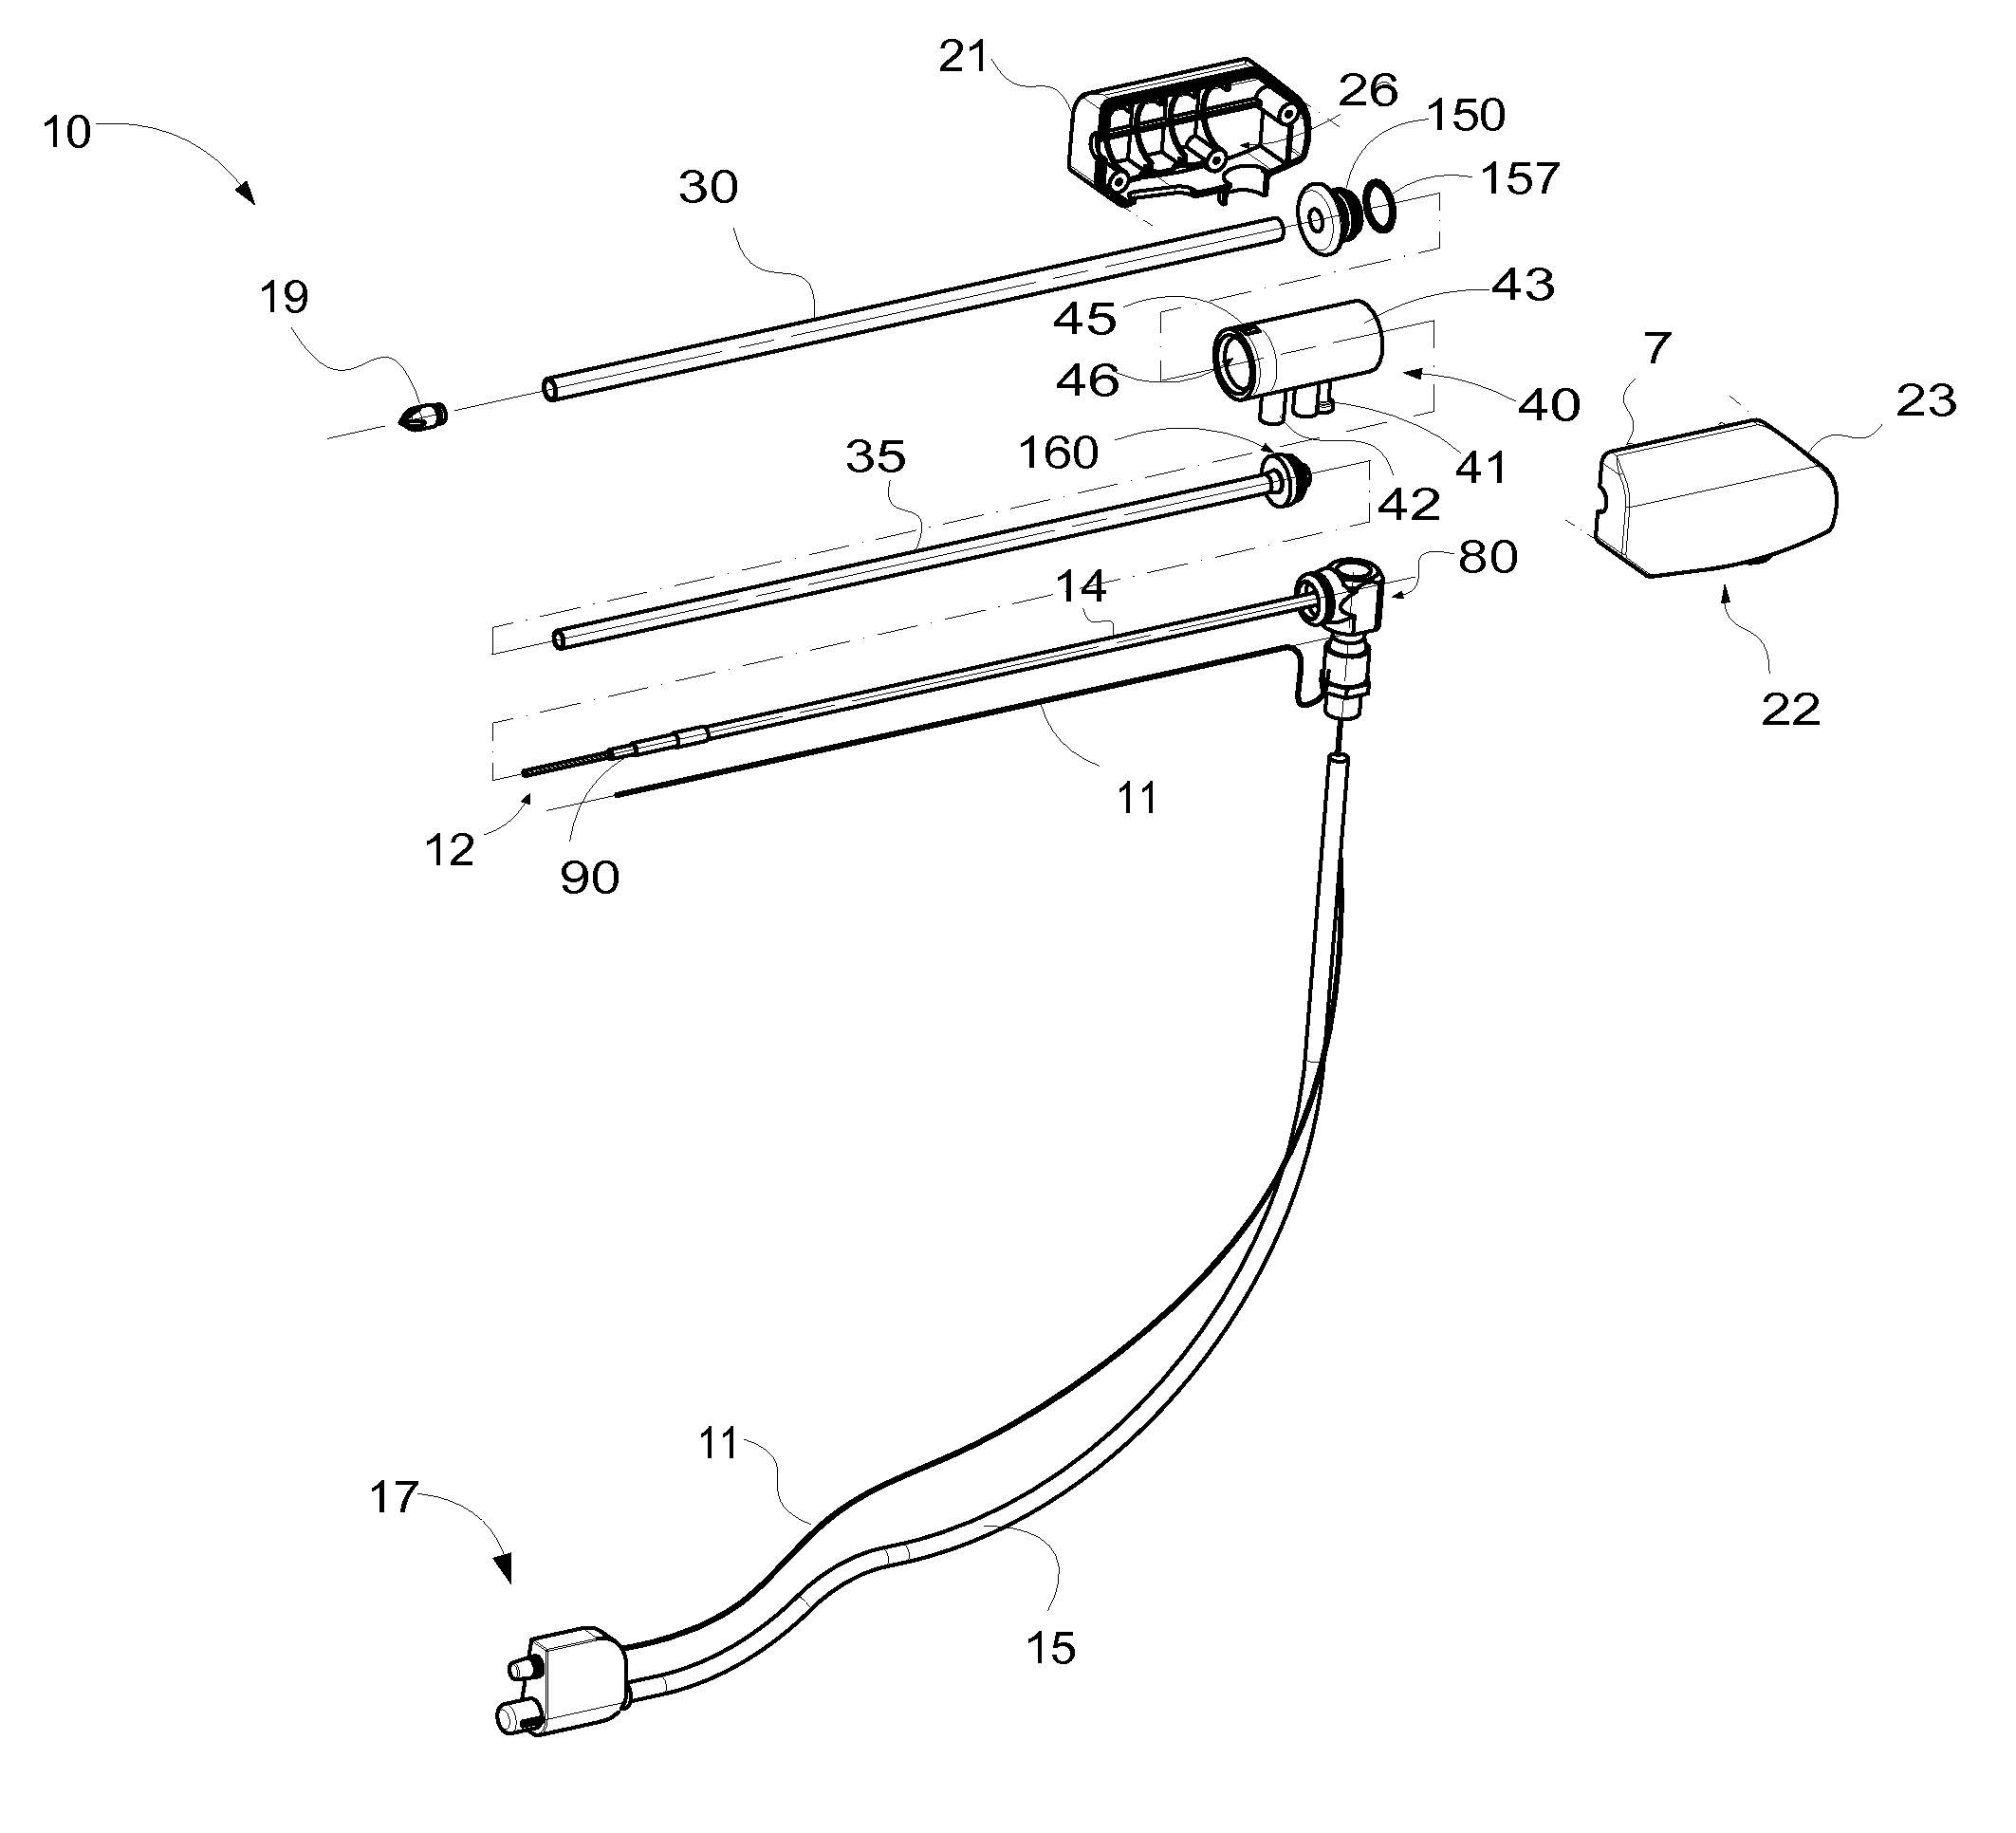 Microwave energy-delivery device and system